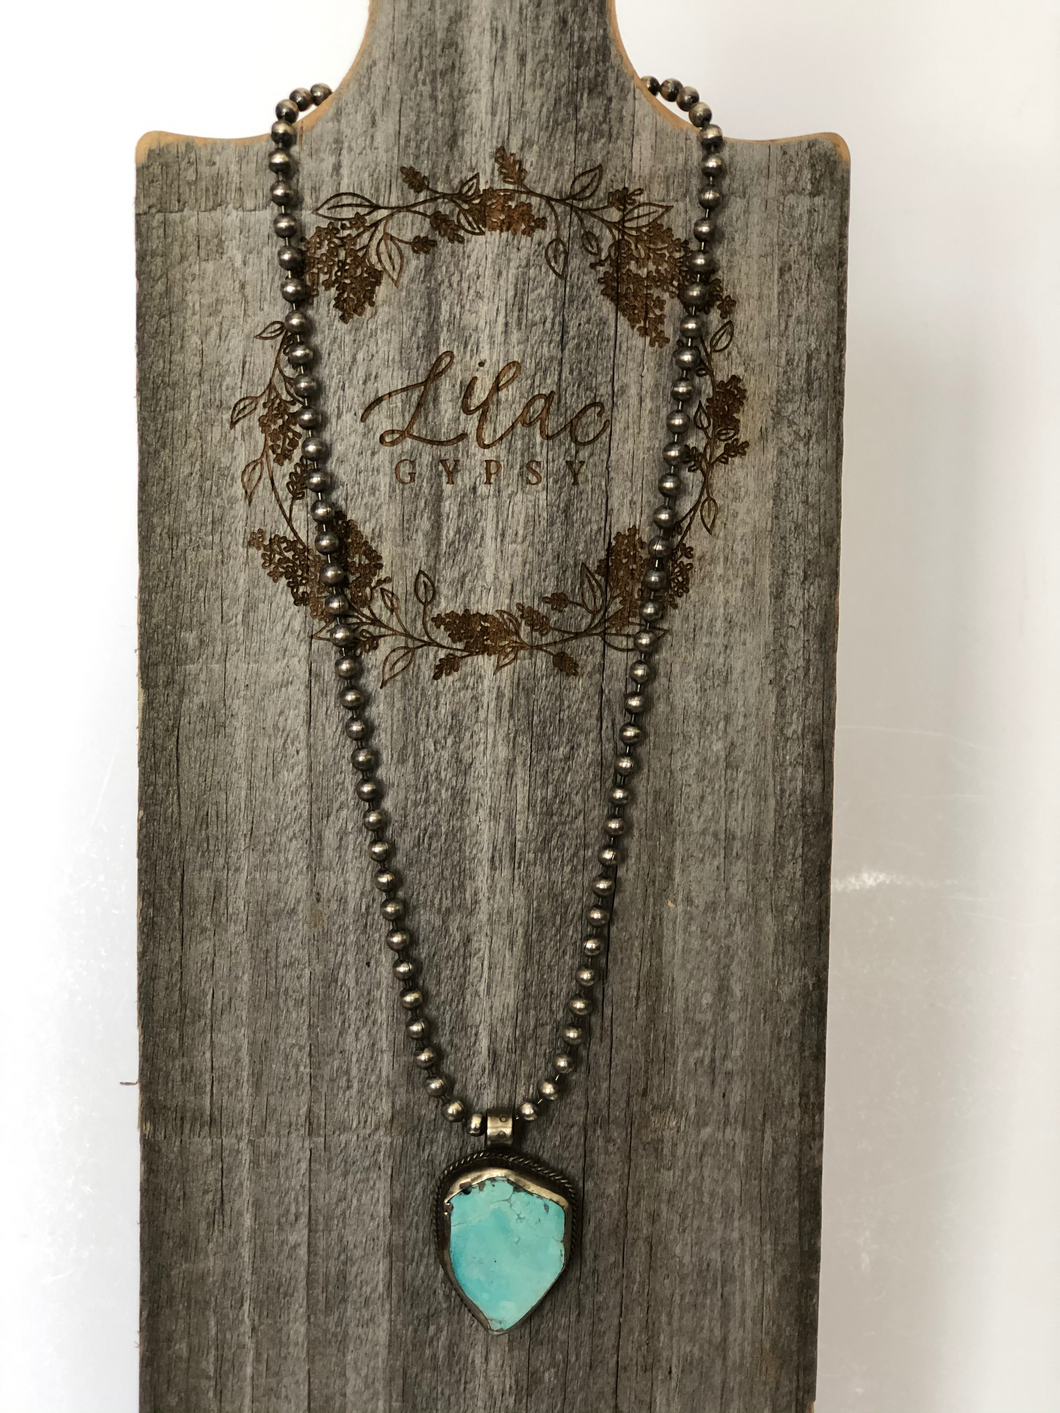 Turquoise Slab Pendant on Small Ball Chain Necklace